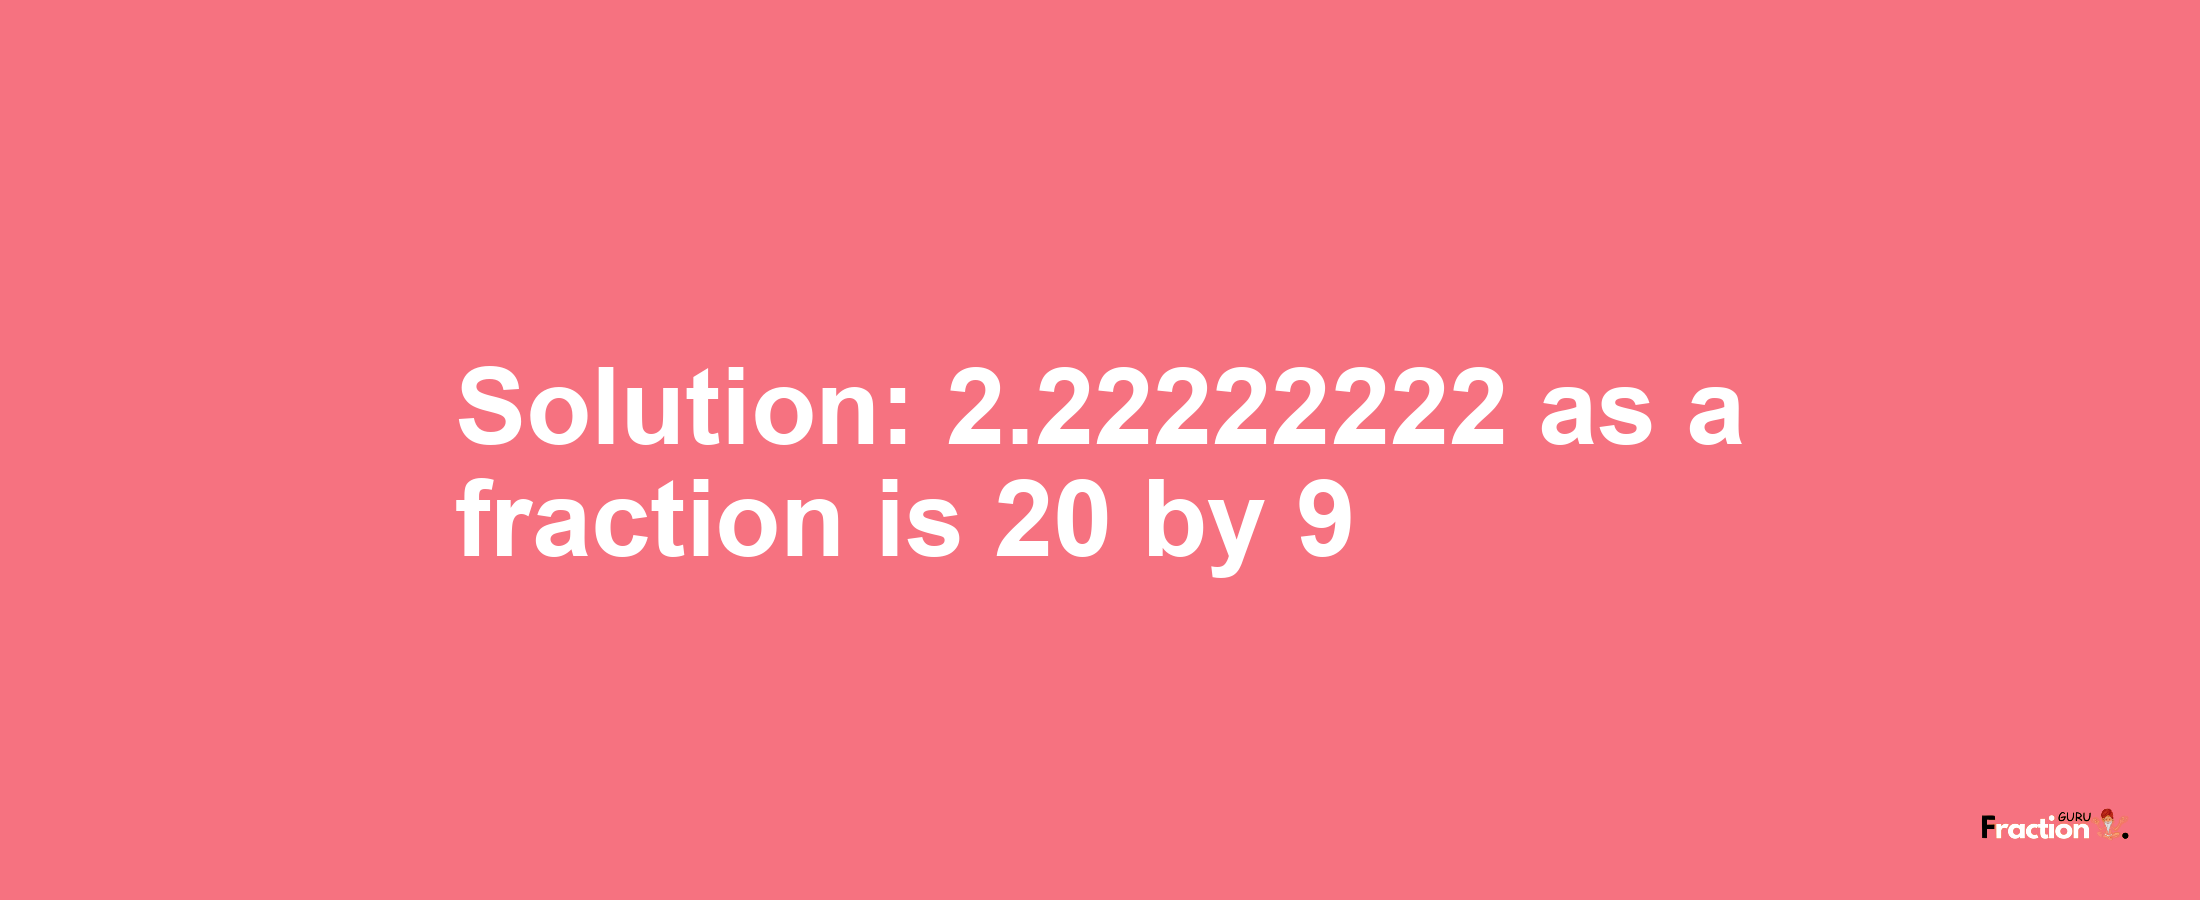 Solution:2.22222222 as a fraction is 20/9